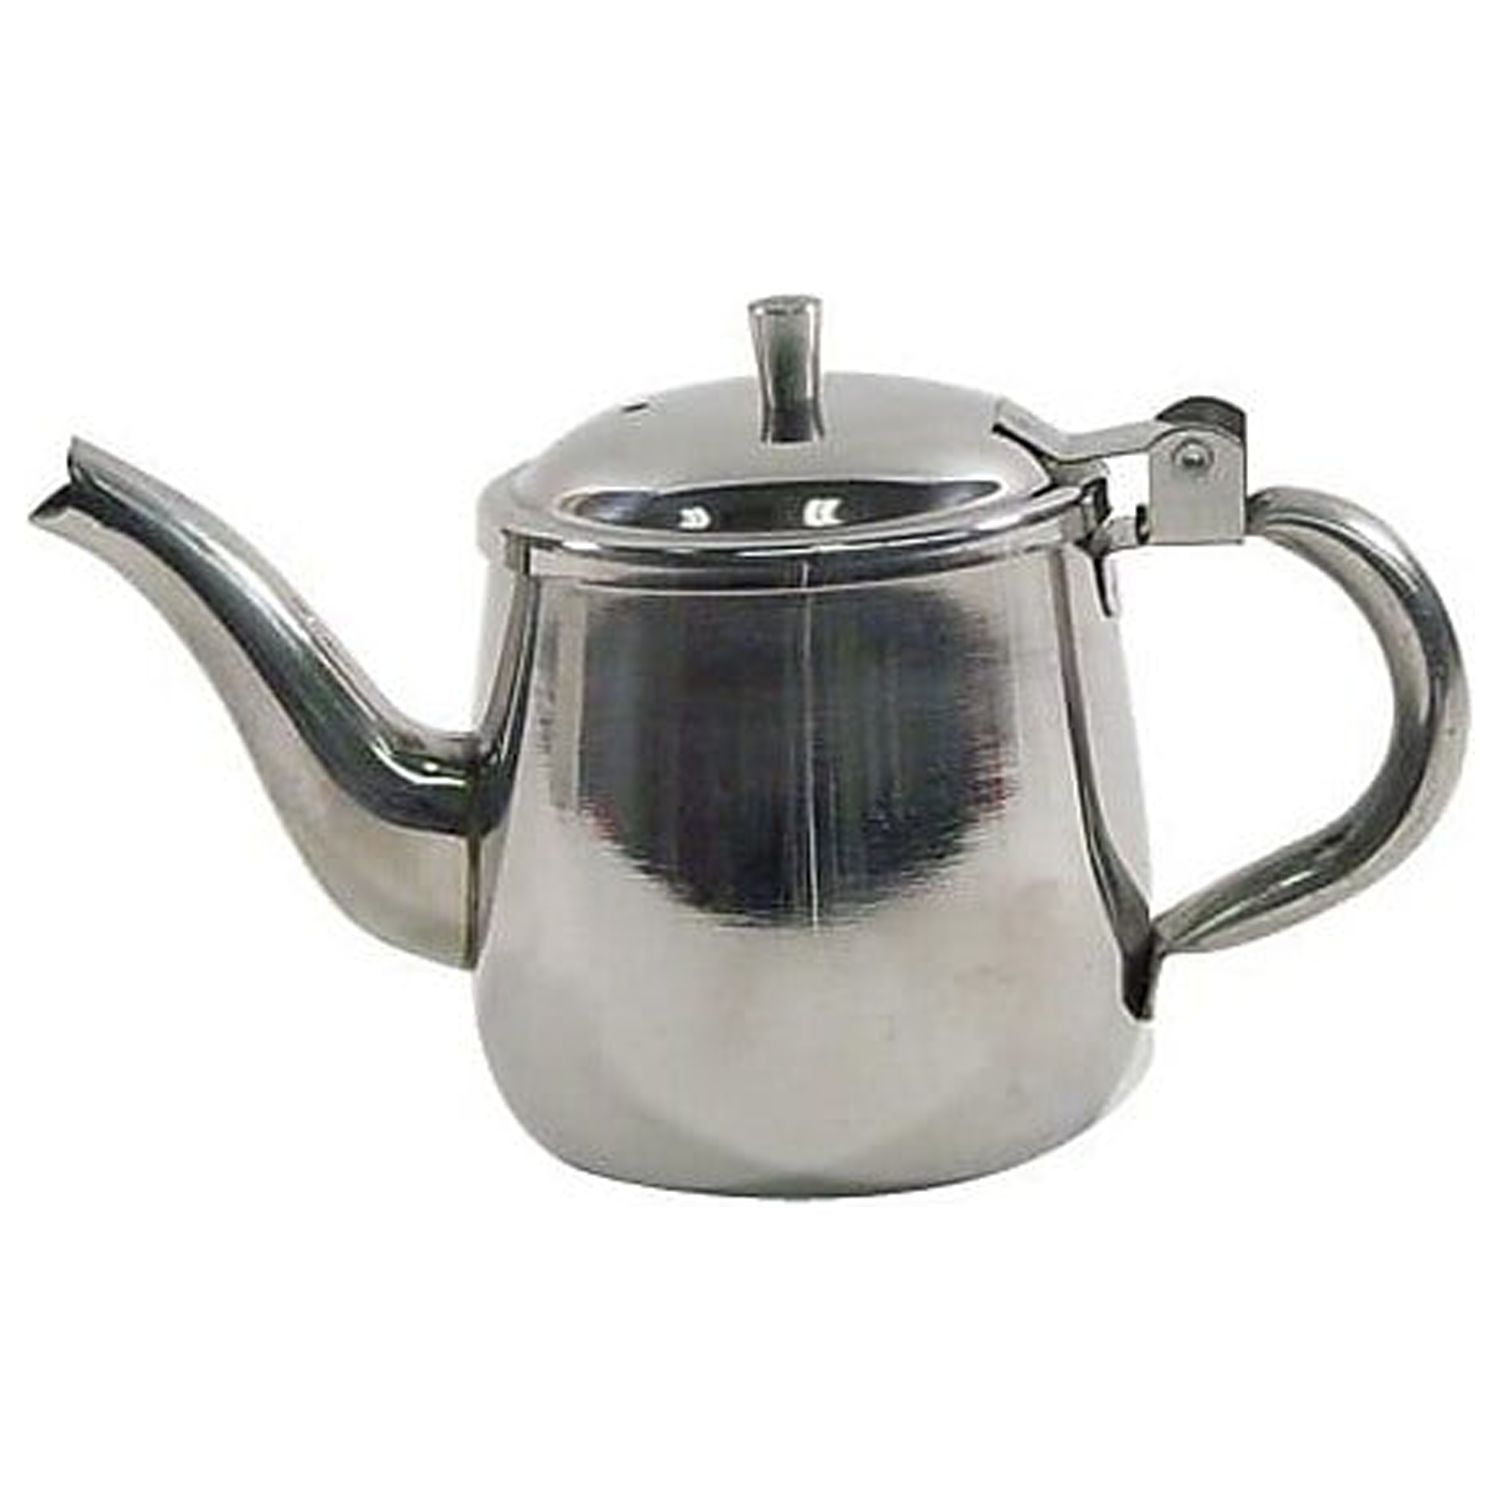 Wolfgang Puck Stainless Steel Petite Kettle and Tea Pot with